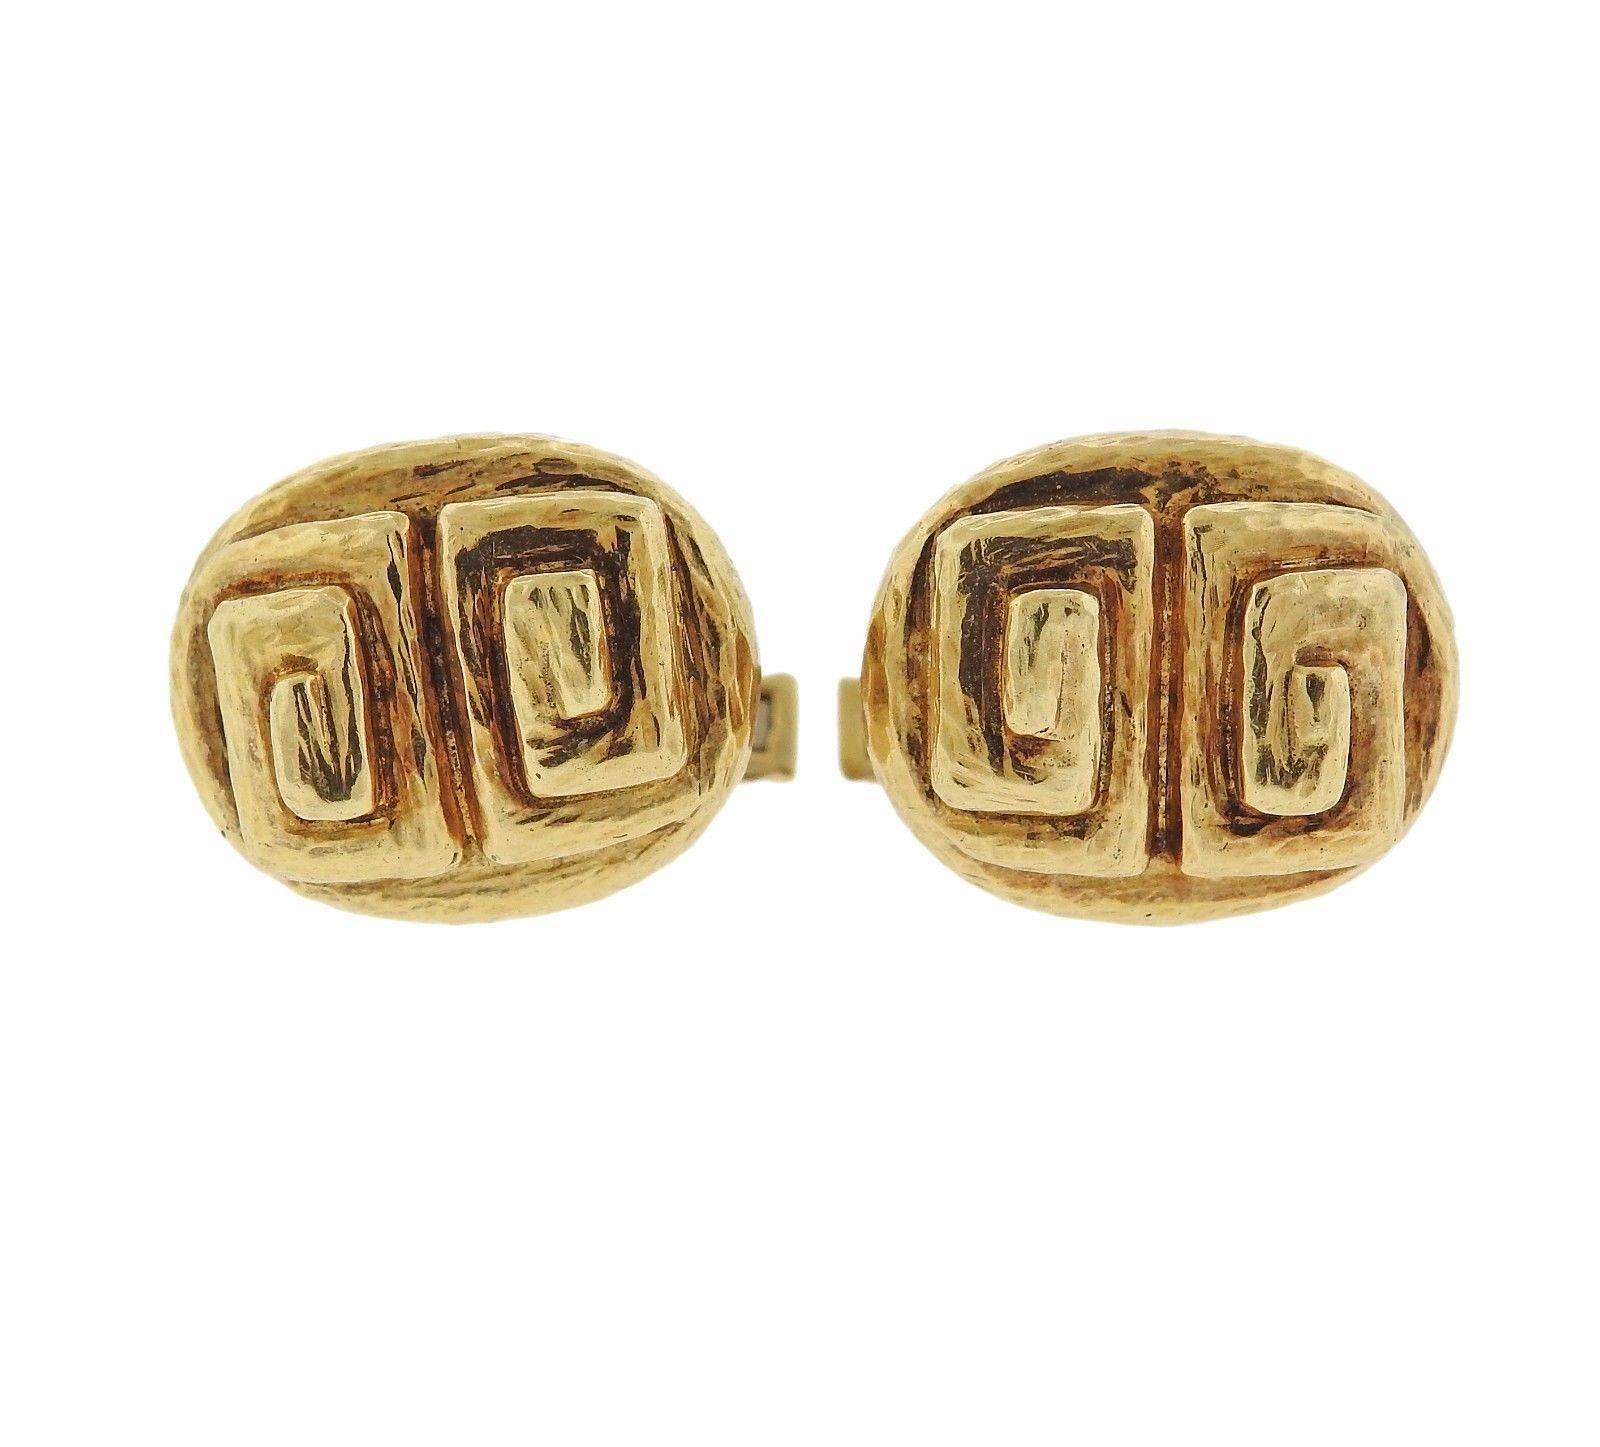 A pair of 18k yellow gold cufflinks by David Webb. The cufflinks measure 18mm x 15mm and weigh 17 grams.  Marked: 18k, Webb.